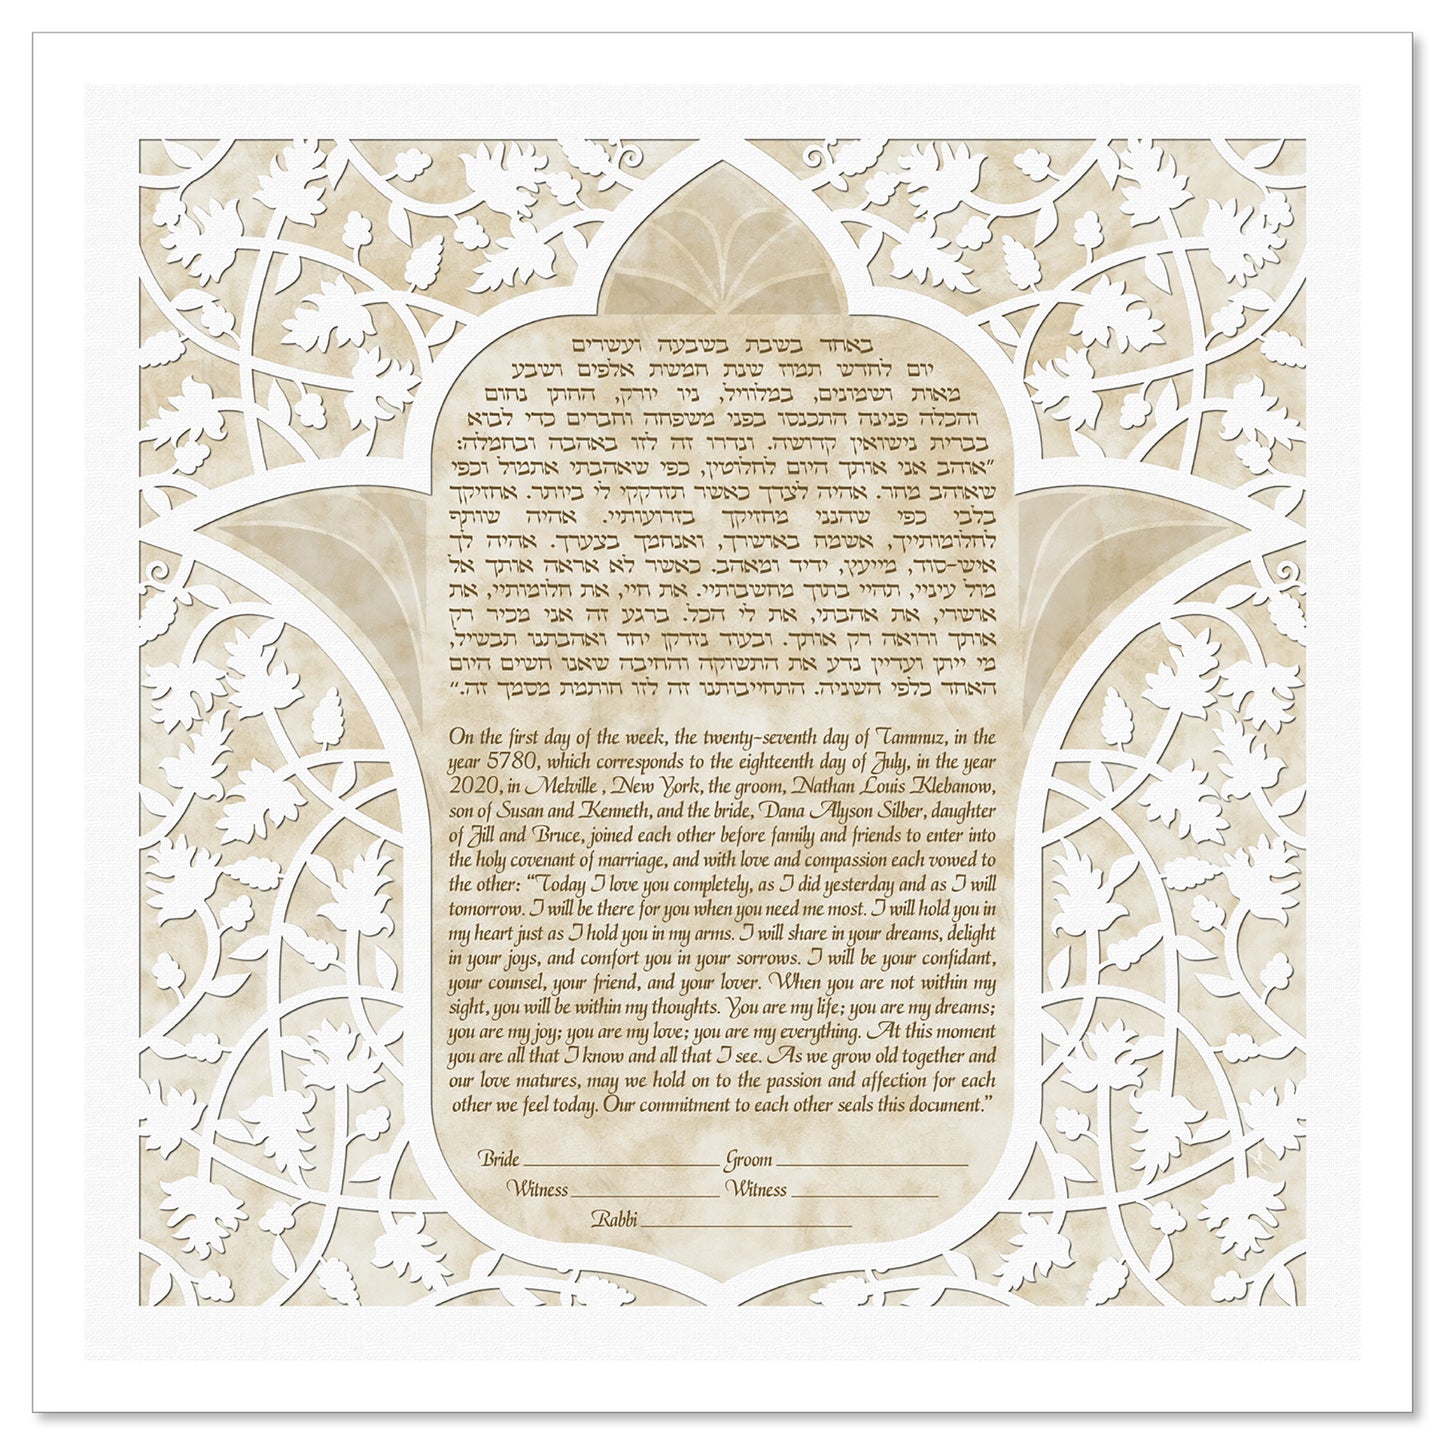 Lotus Hamsa 1 Parchment ketubah by Micah Parker features the ketubah text in the center of a hamsa shape that resembles a lotus flower with a lacy white leaf pattern over a parchment background.